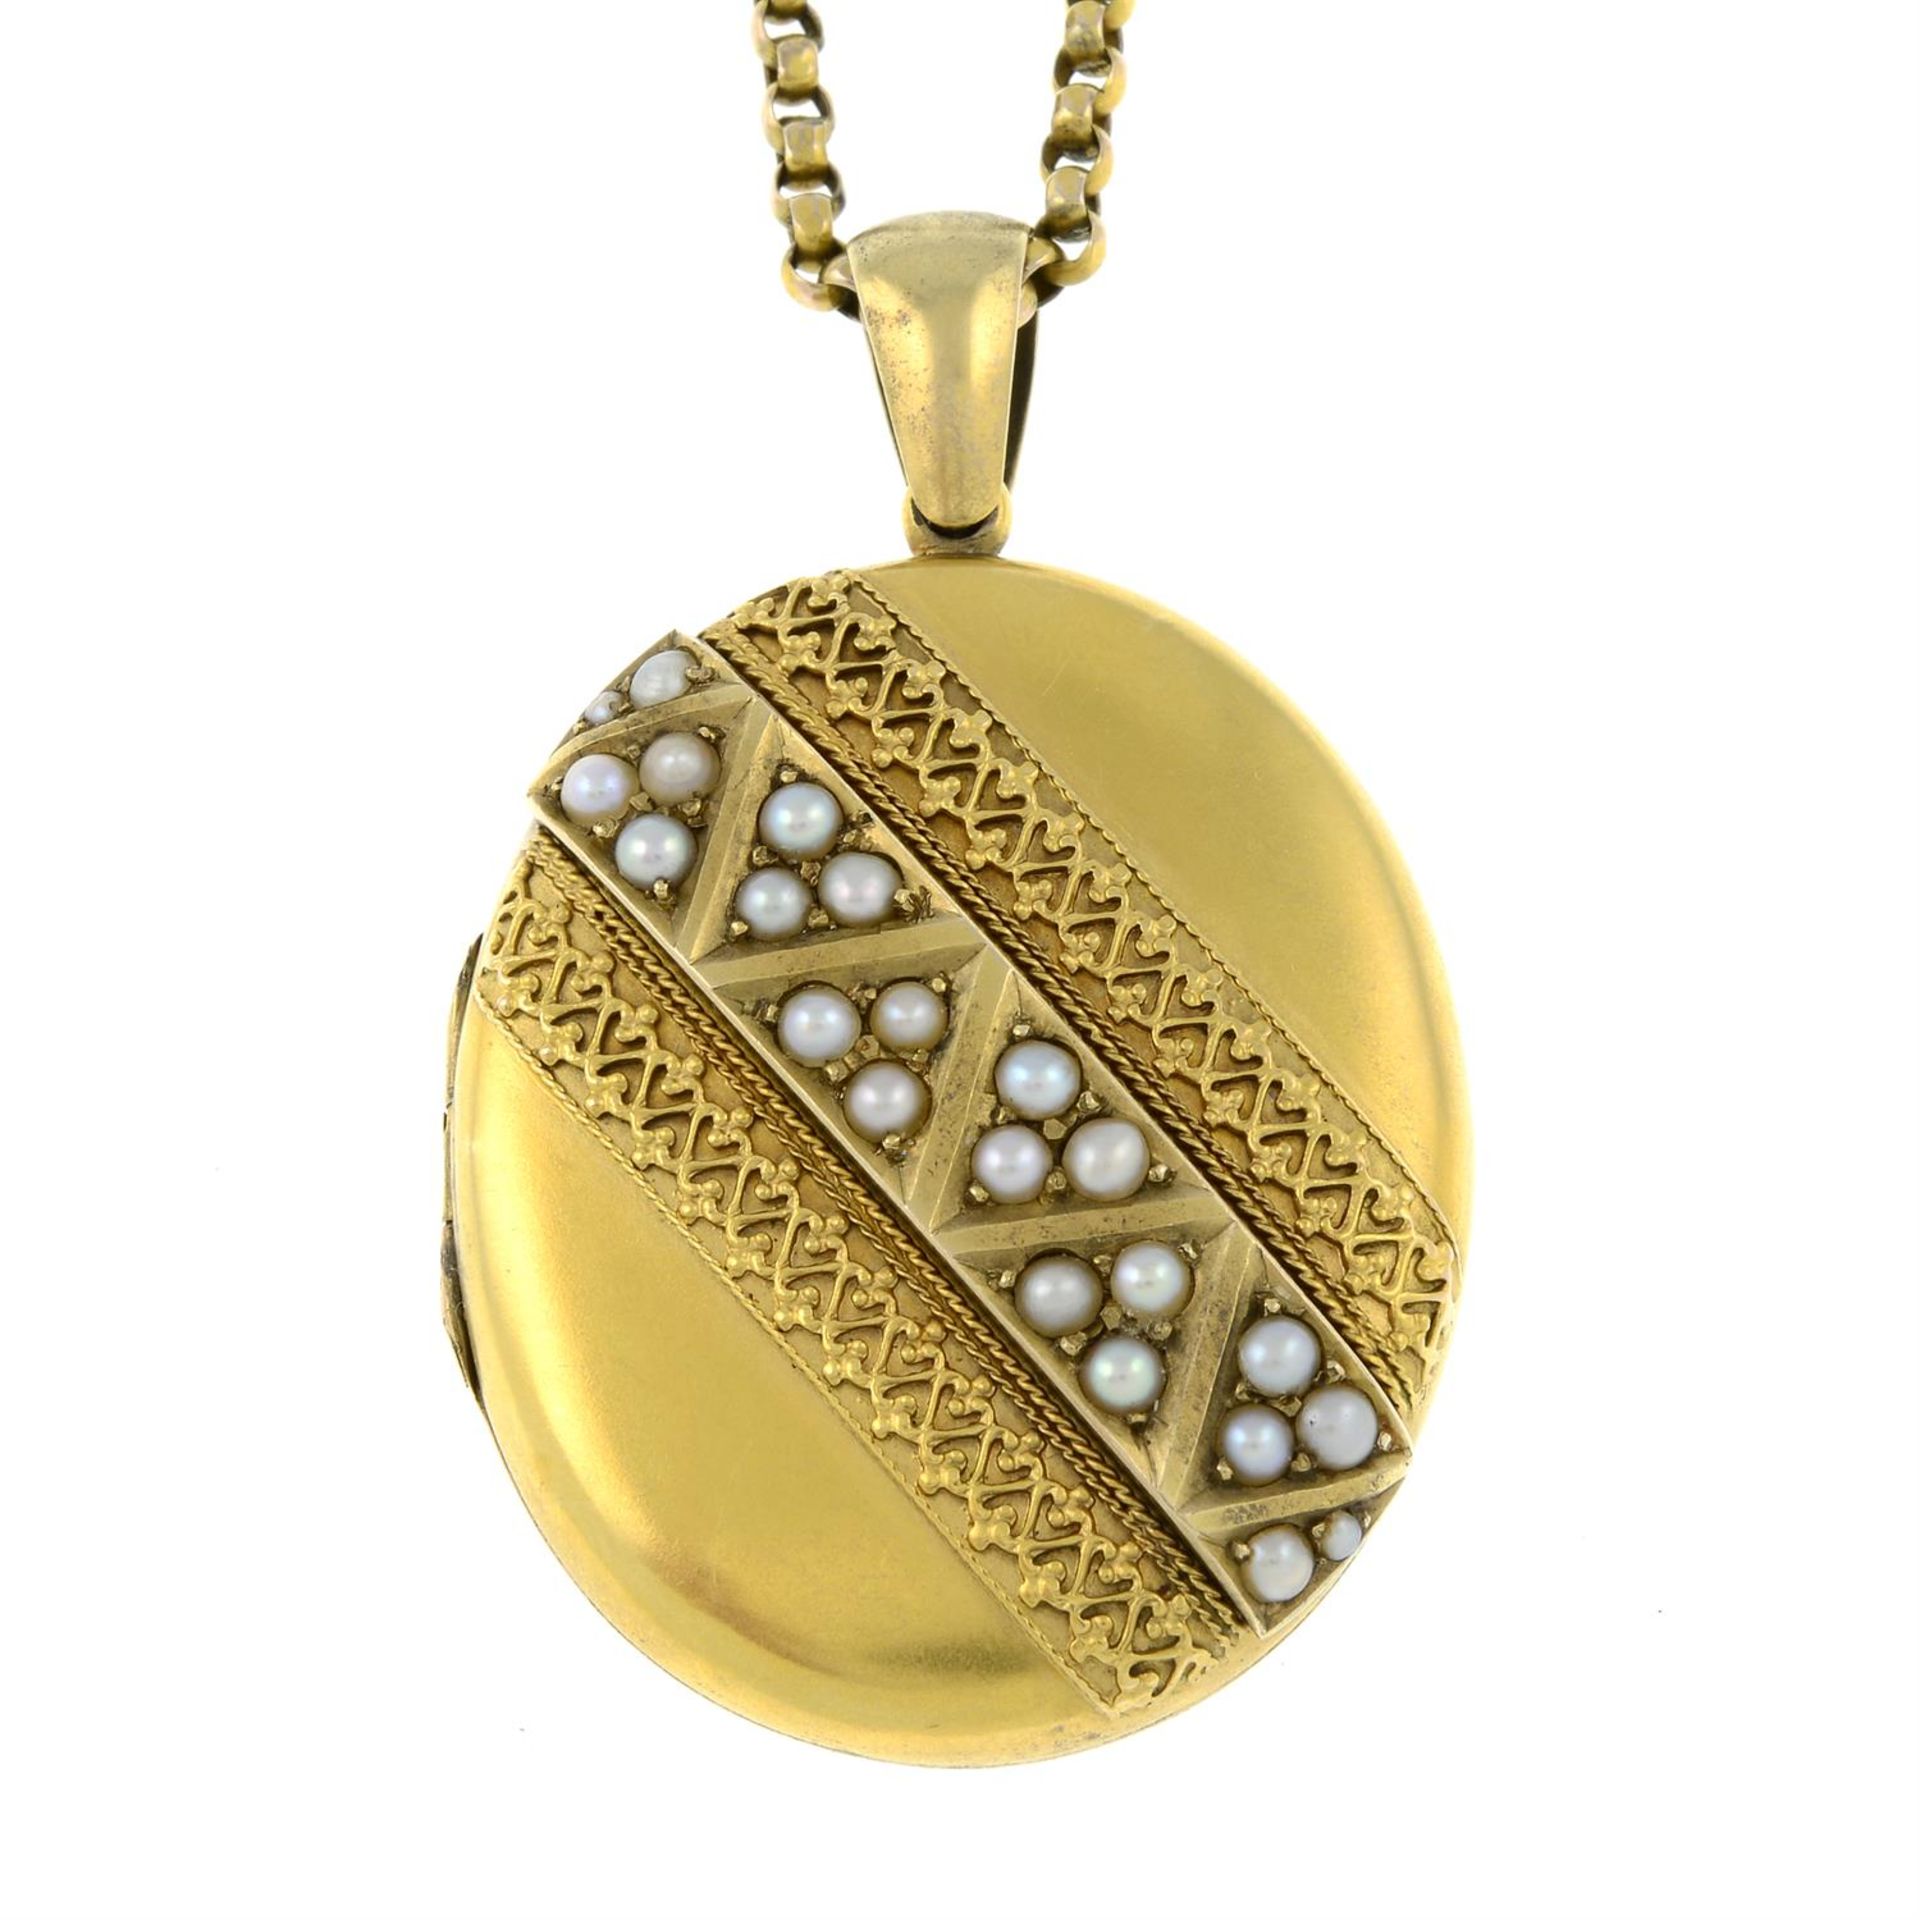 An early 20th century gold split pearl locket pendant, with chain.